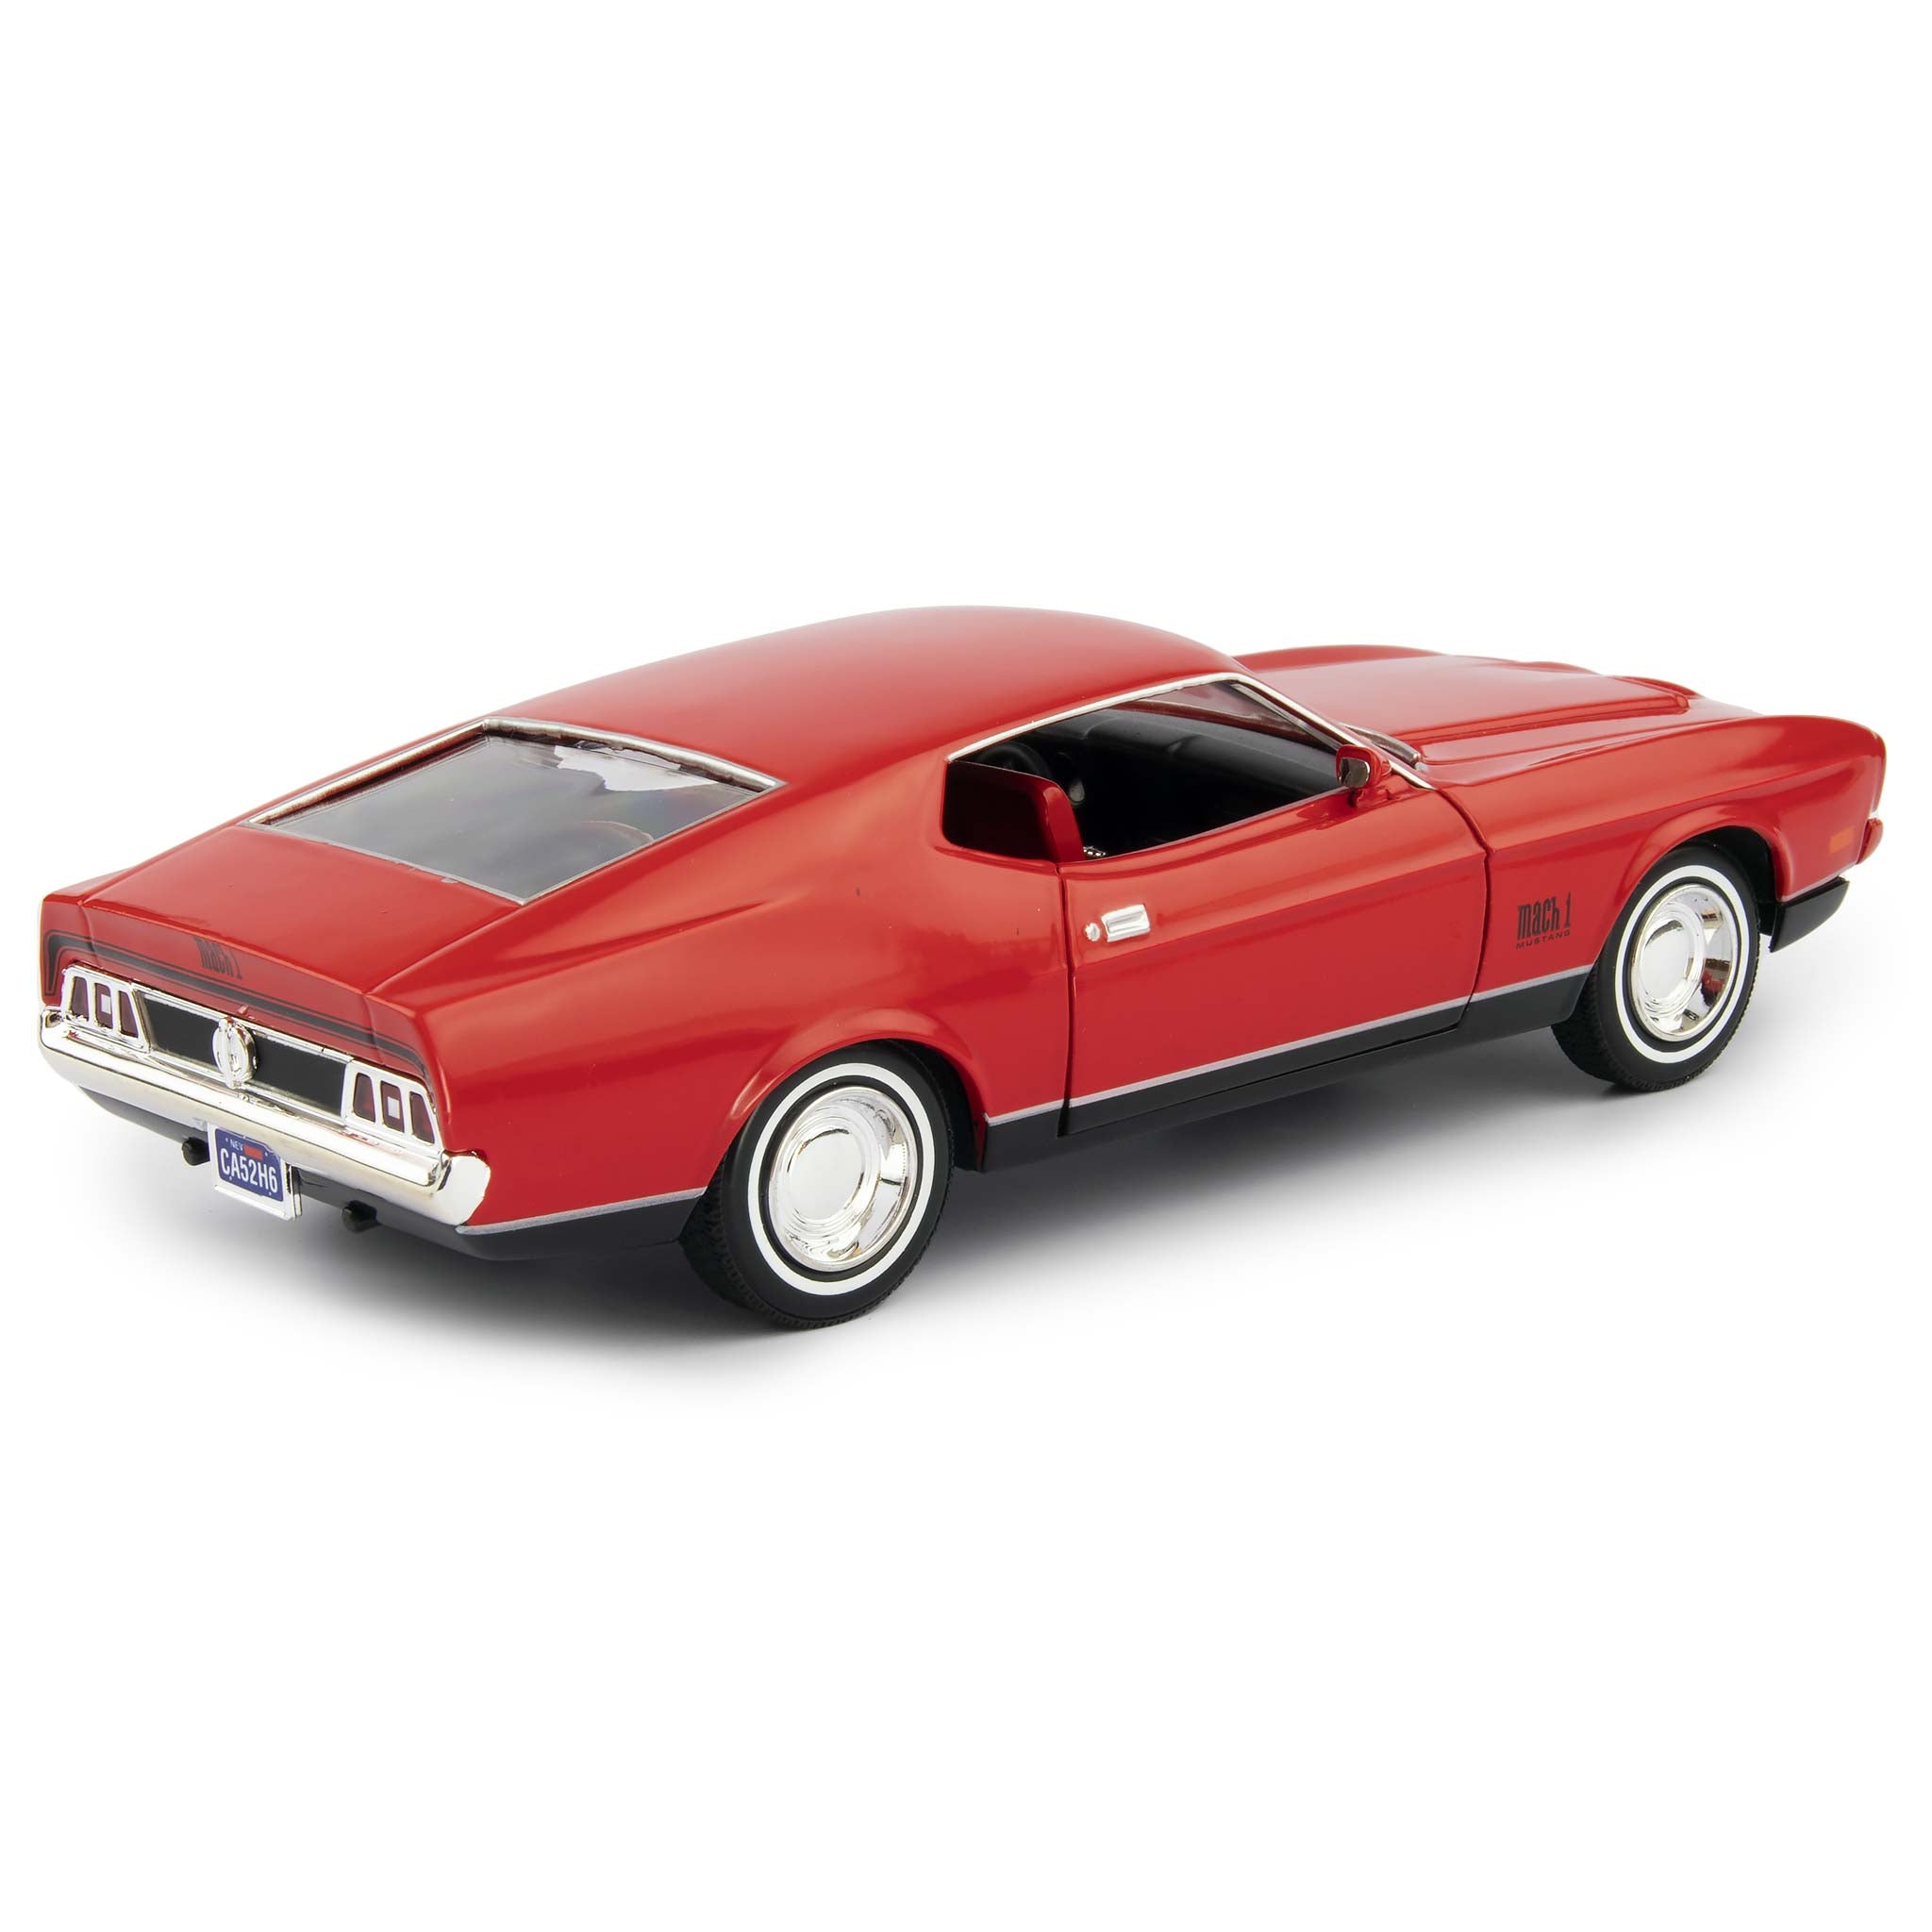 Ford Mustang Mach 1 Diecast Model Car James Bond Diamonds Are Forever - 1:24 Scale